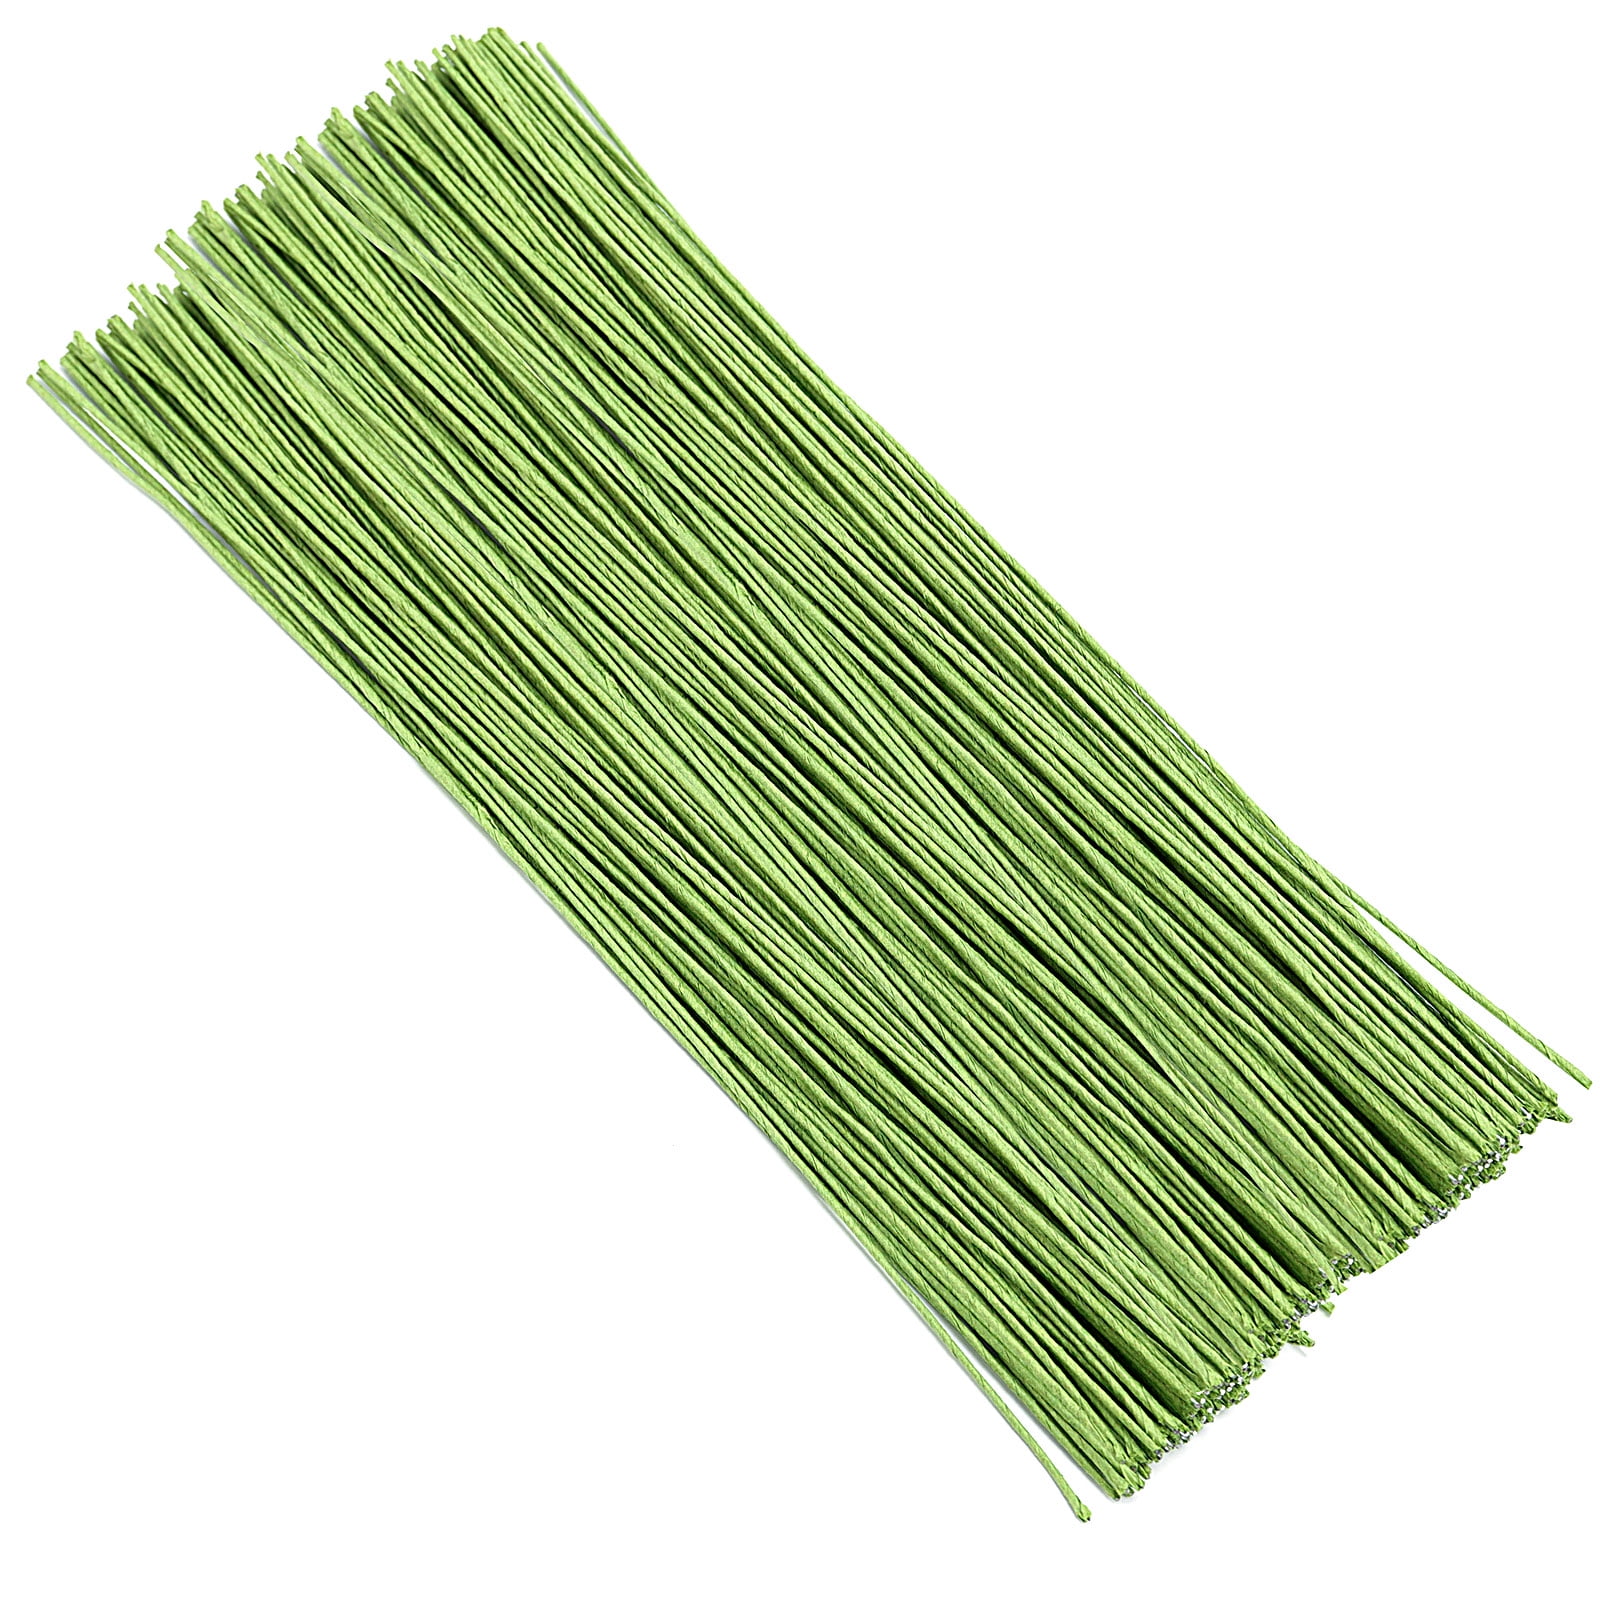 Floral stem wire, bad packing, L: 30 cm, W: 2 mm, green, 20 pc/ 1 pack